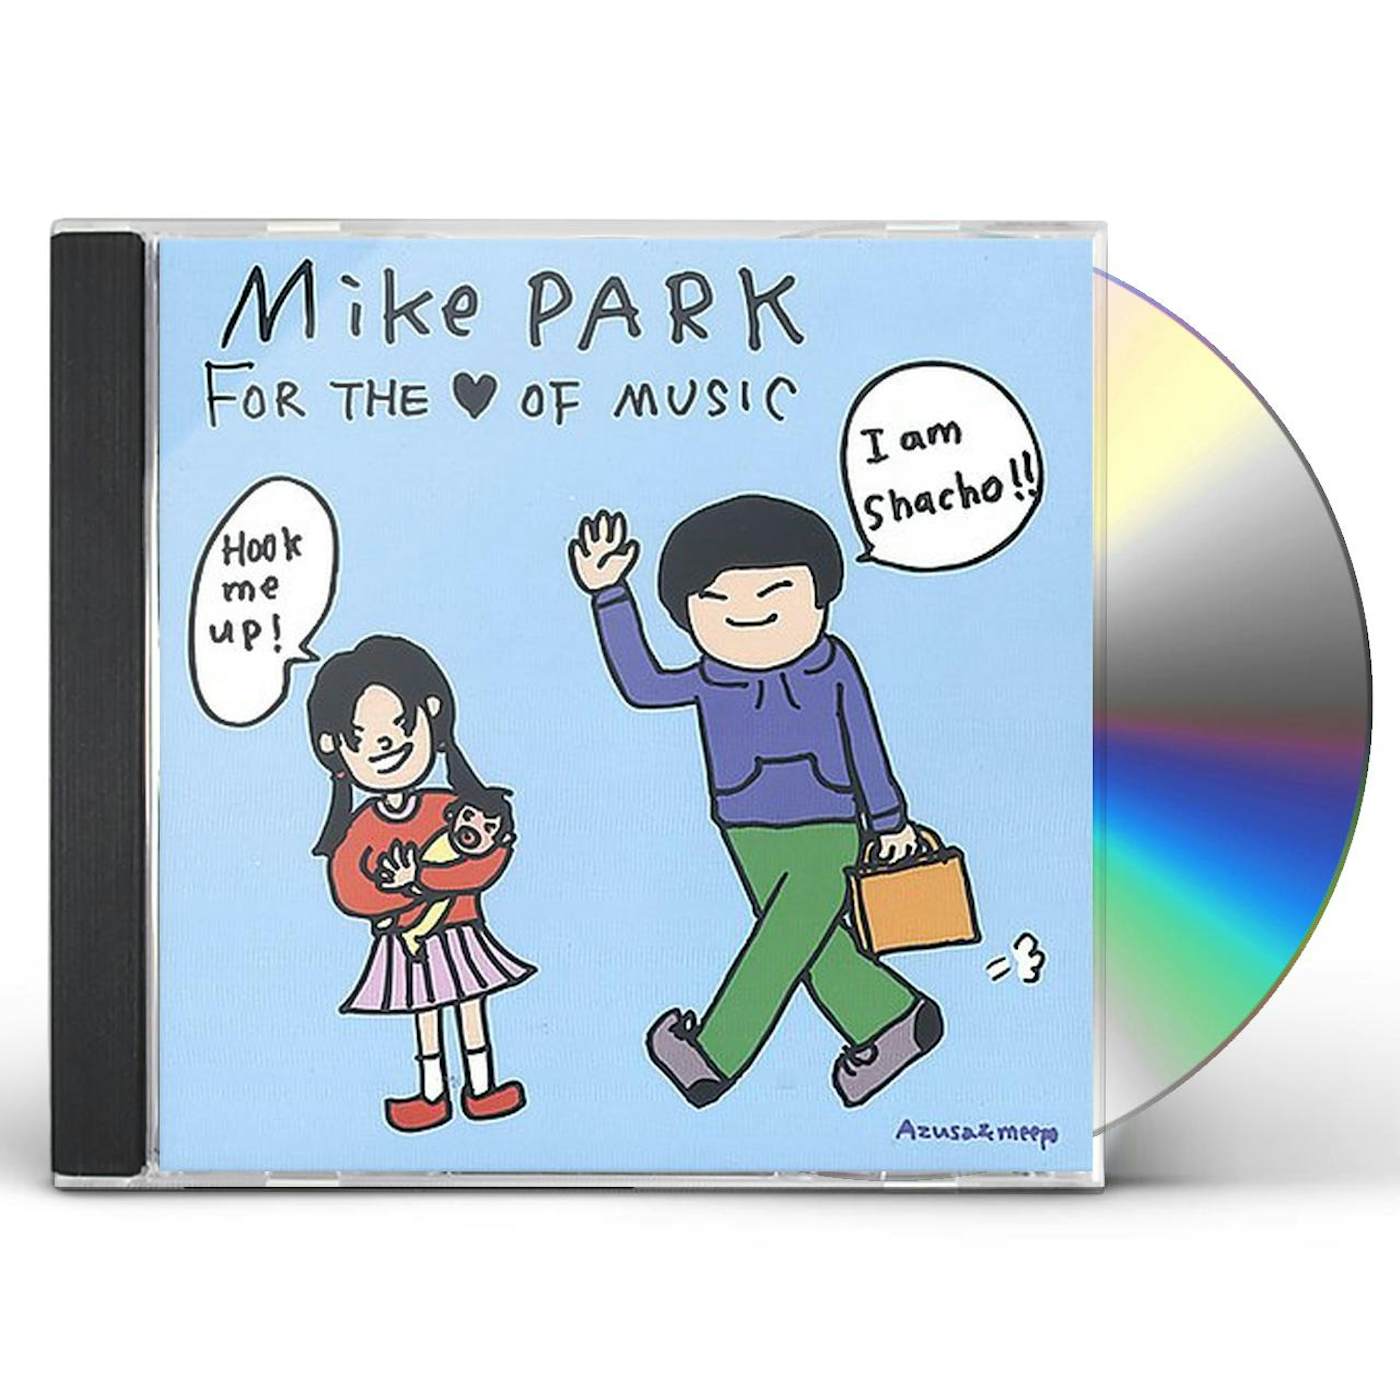 Mike Park FOR THE LOVE OF MUSIC CD